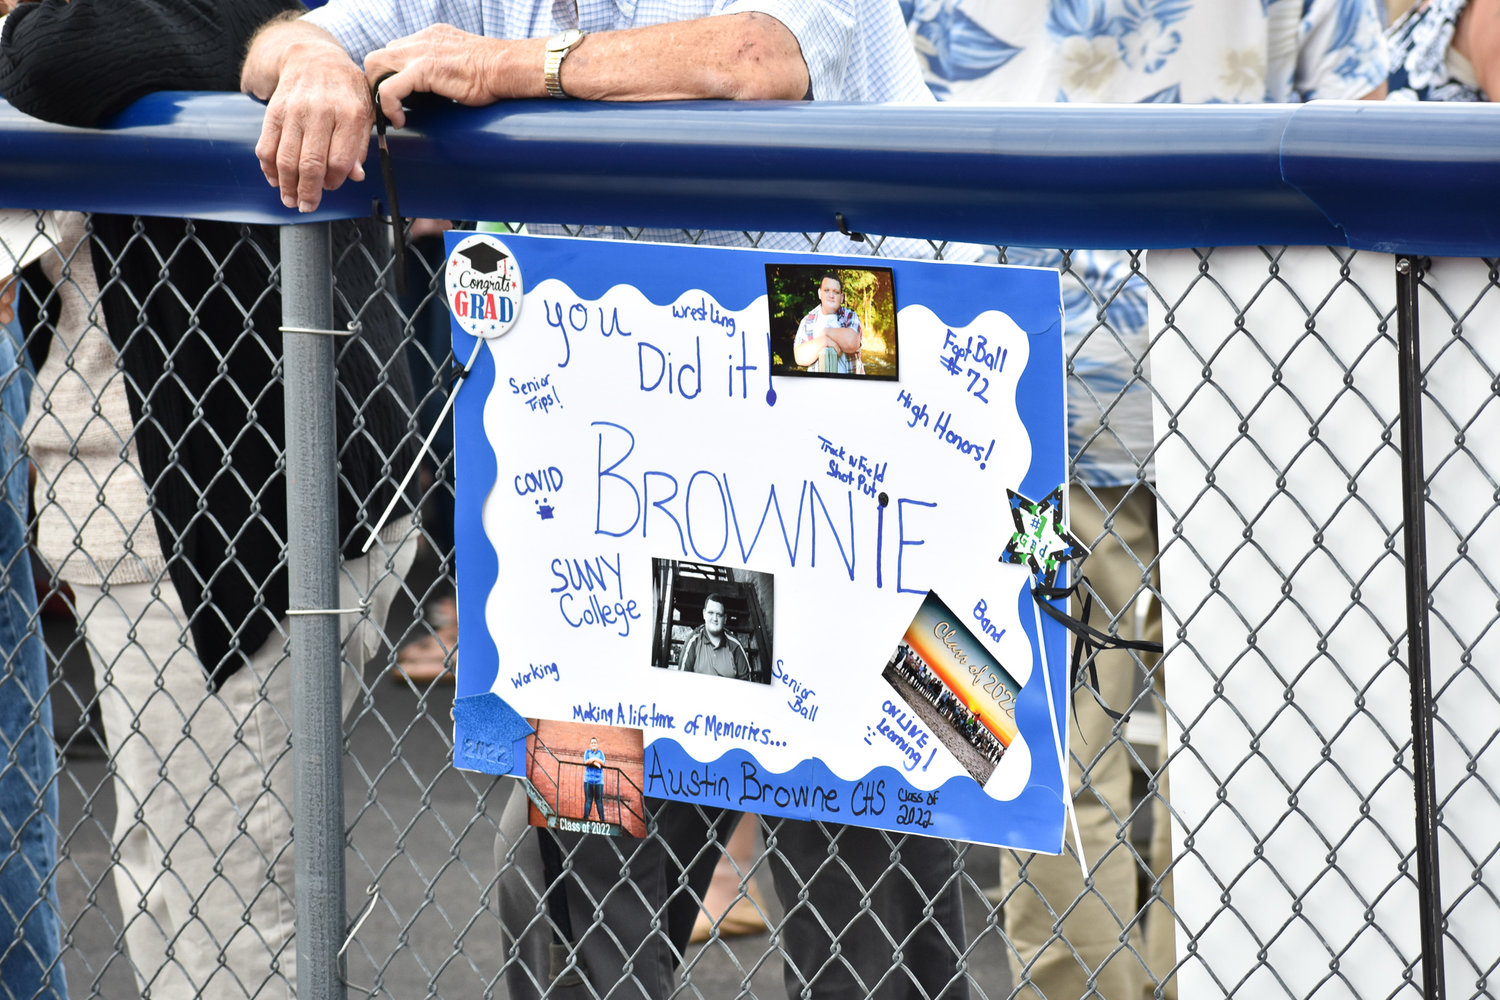 Spectators who couldn't fit on the bleachers leaned against the outer fence. One family hung up a sign to recognize their Camden graduate.